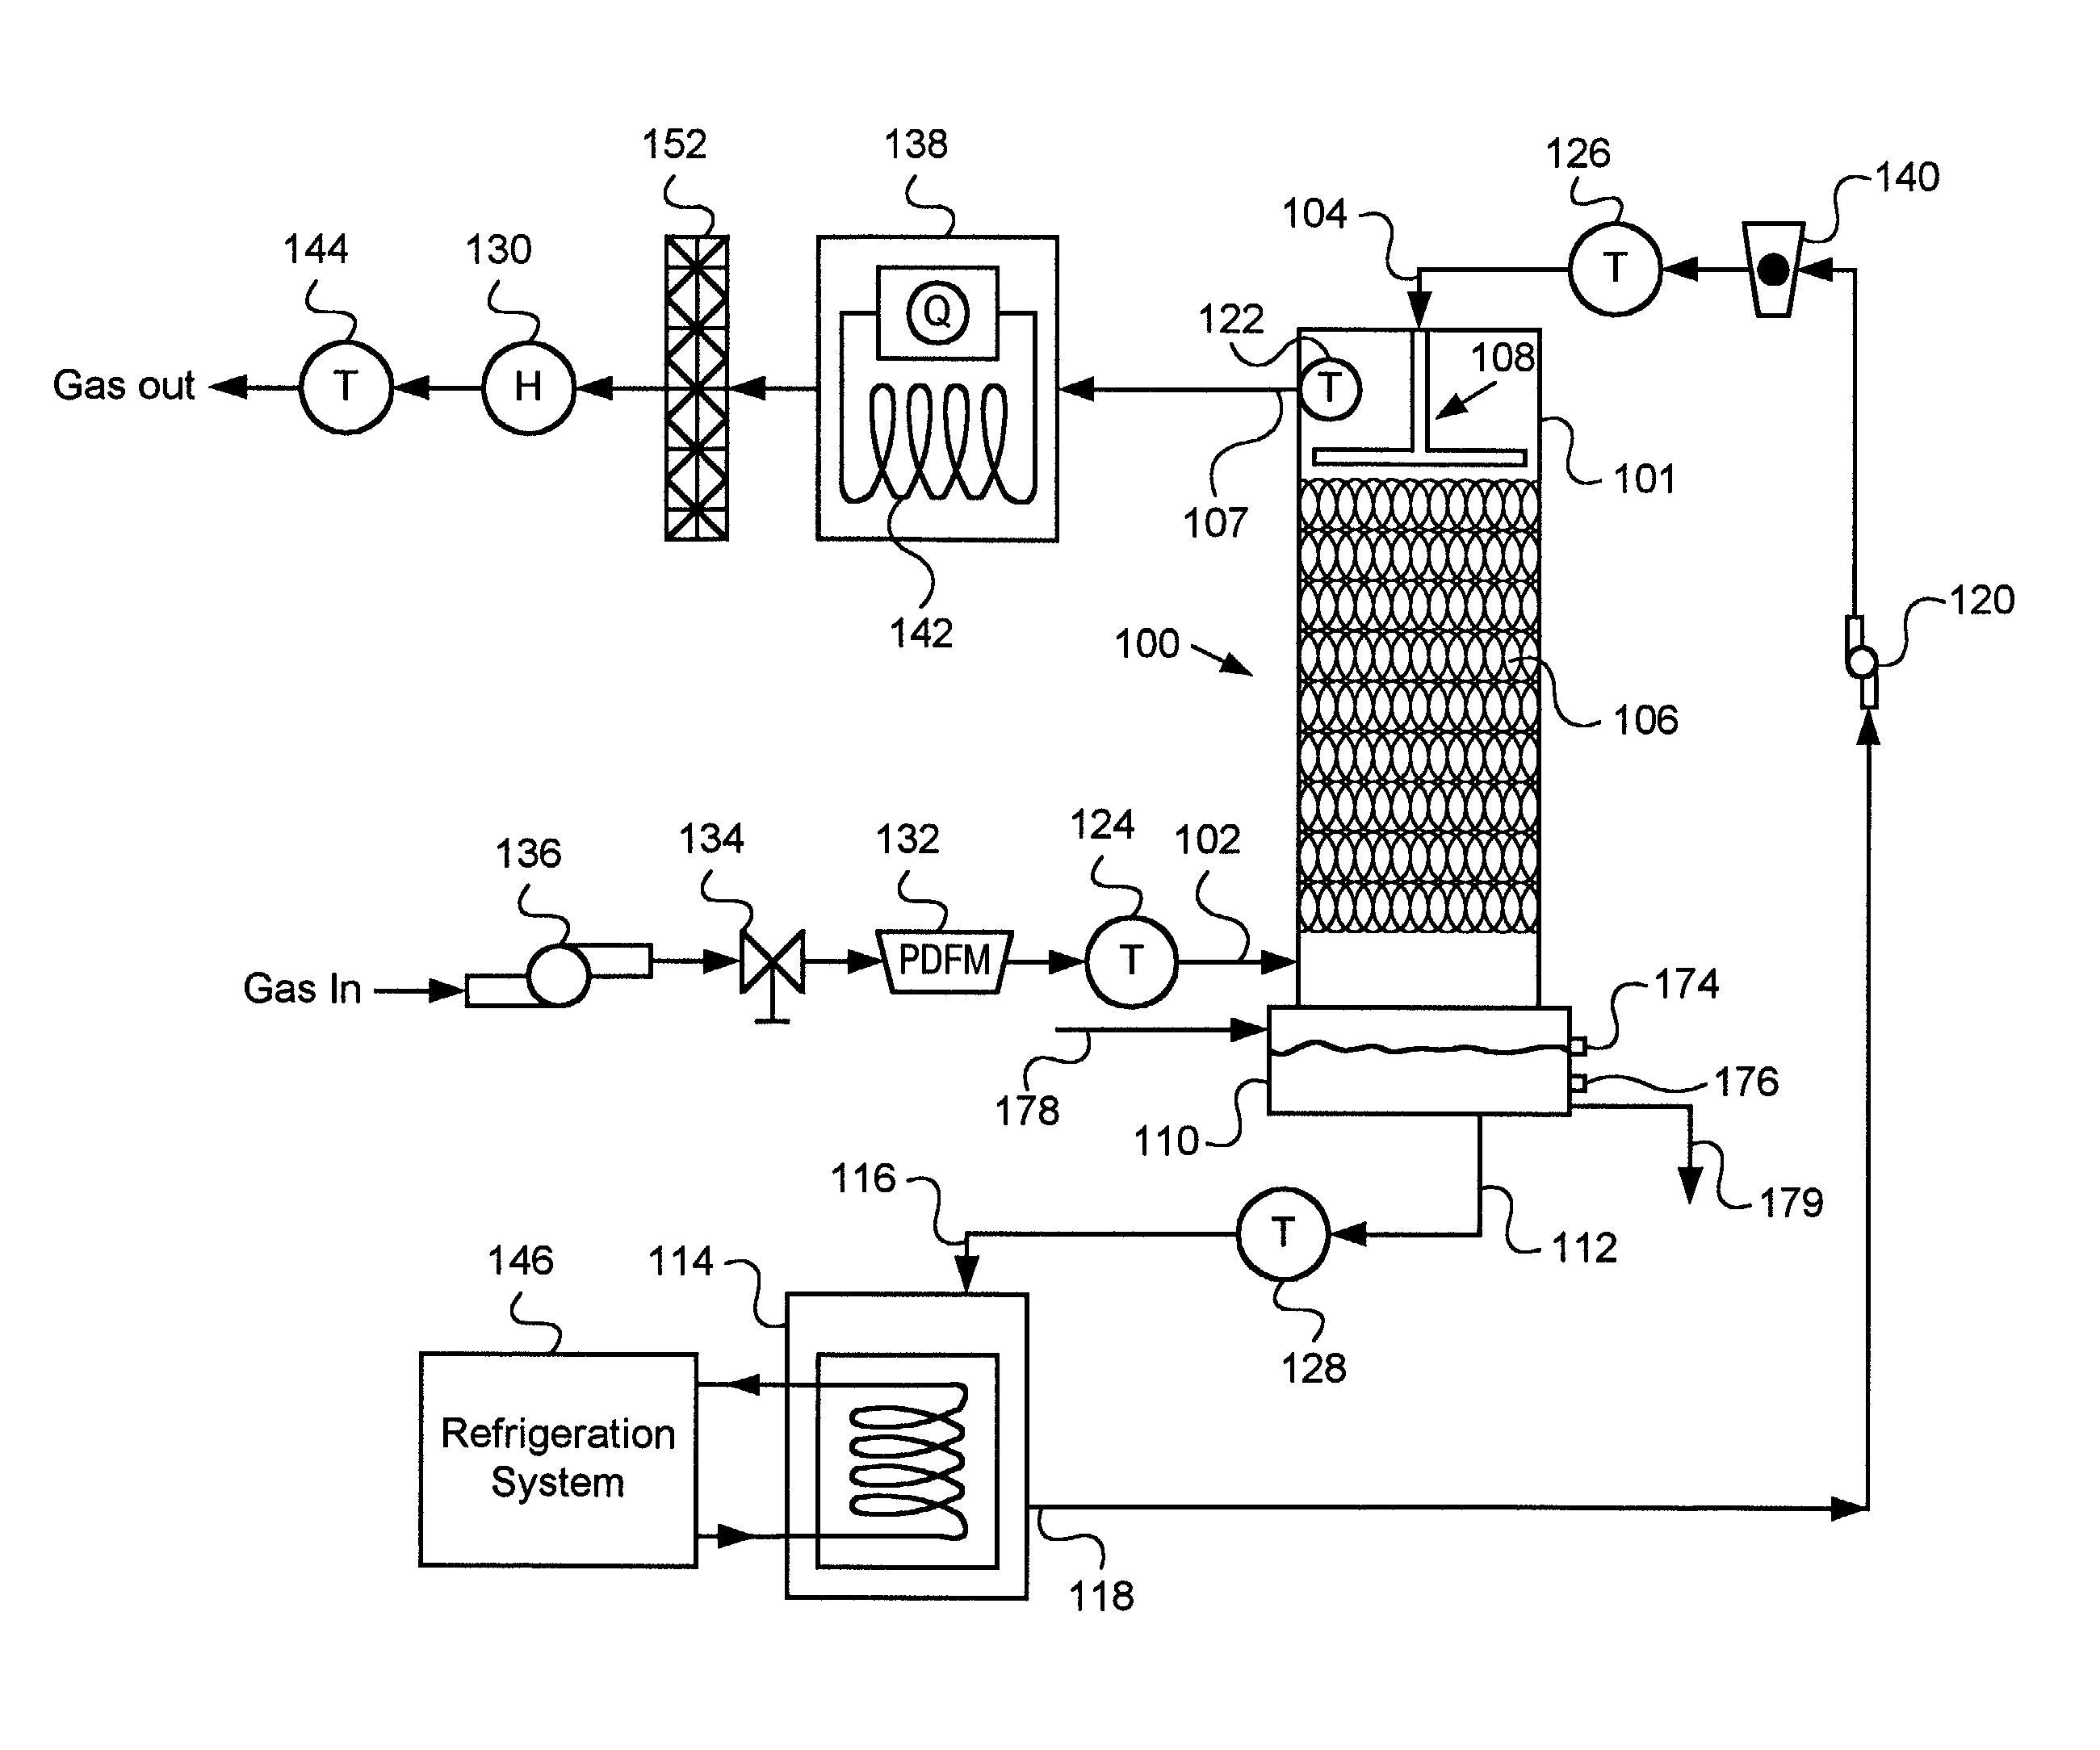 Systems and methods for controlling local environment